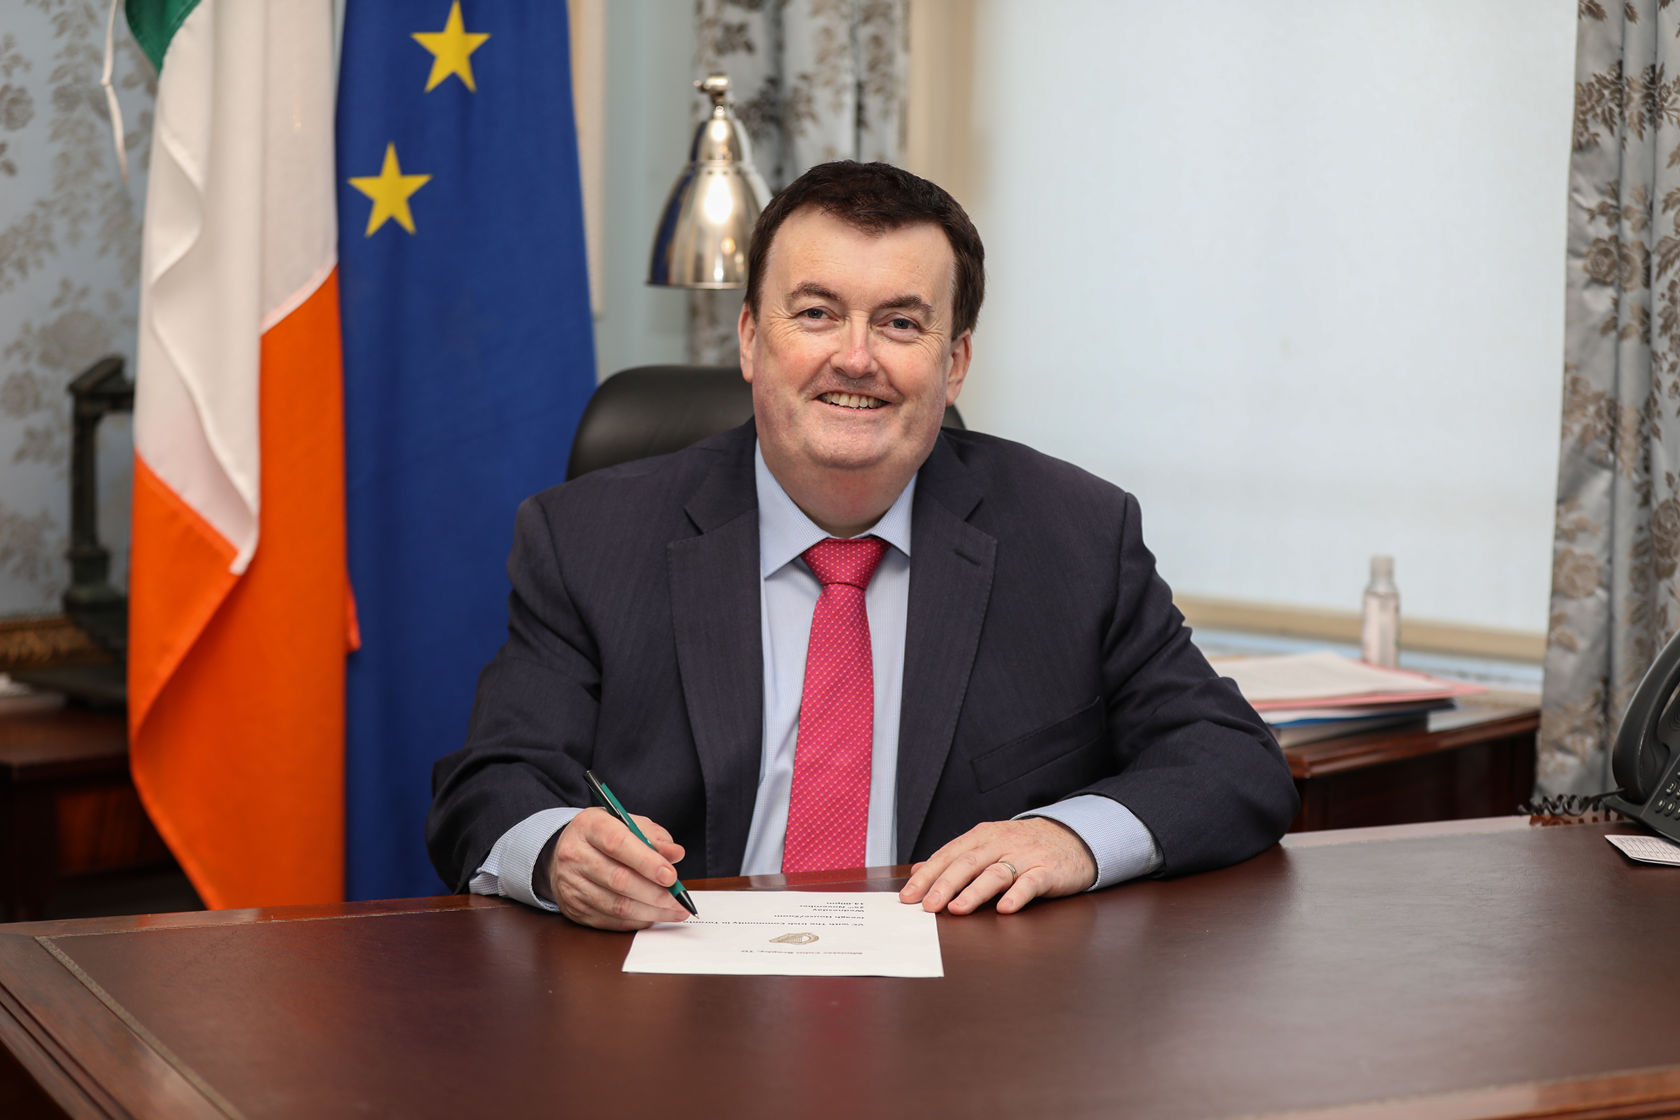 Global Irish Newsletter 14 June 2021 - a Message from Minister Brophy